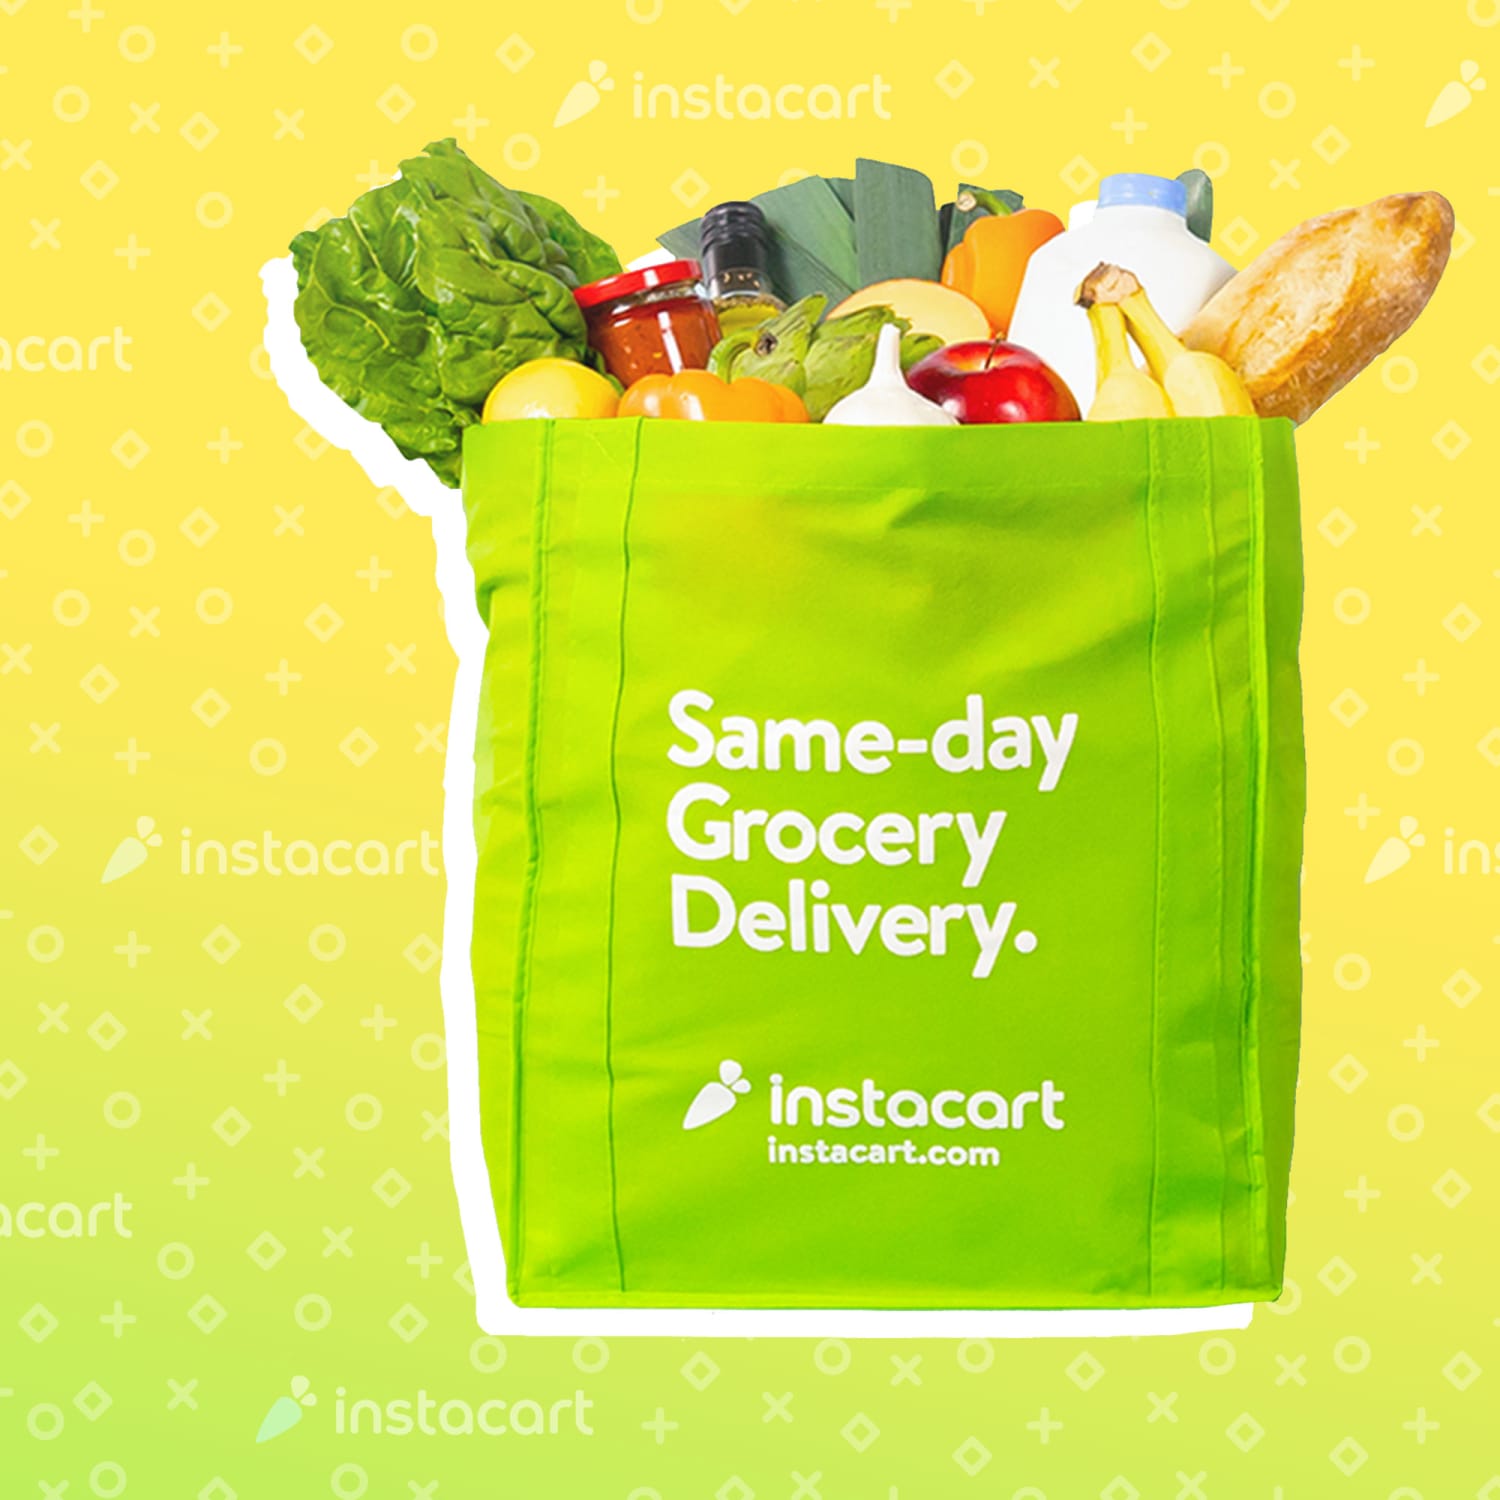 Instacart now lets you order same-day delivery for large items, including  furniture and electronics